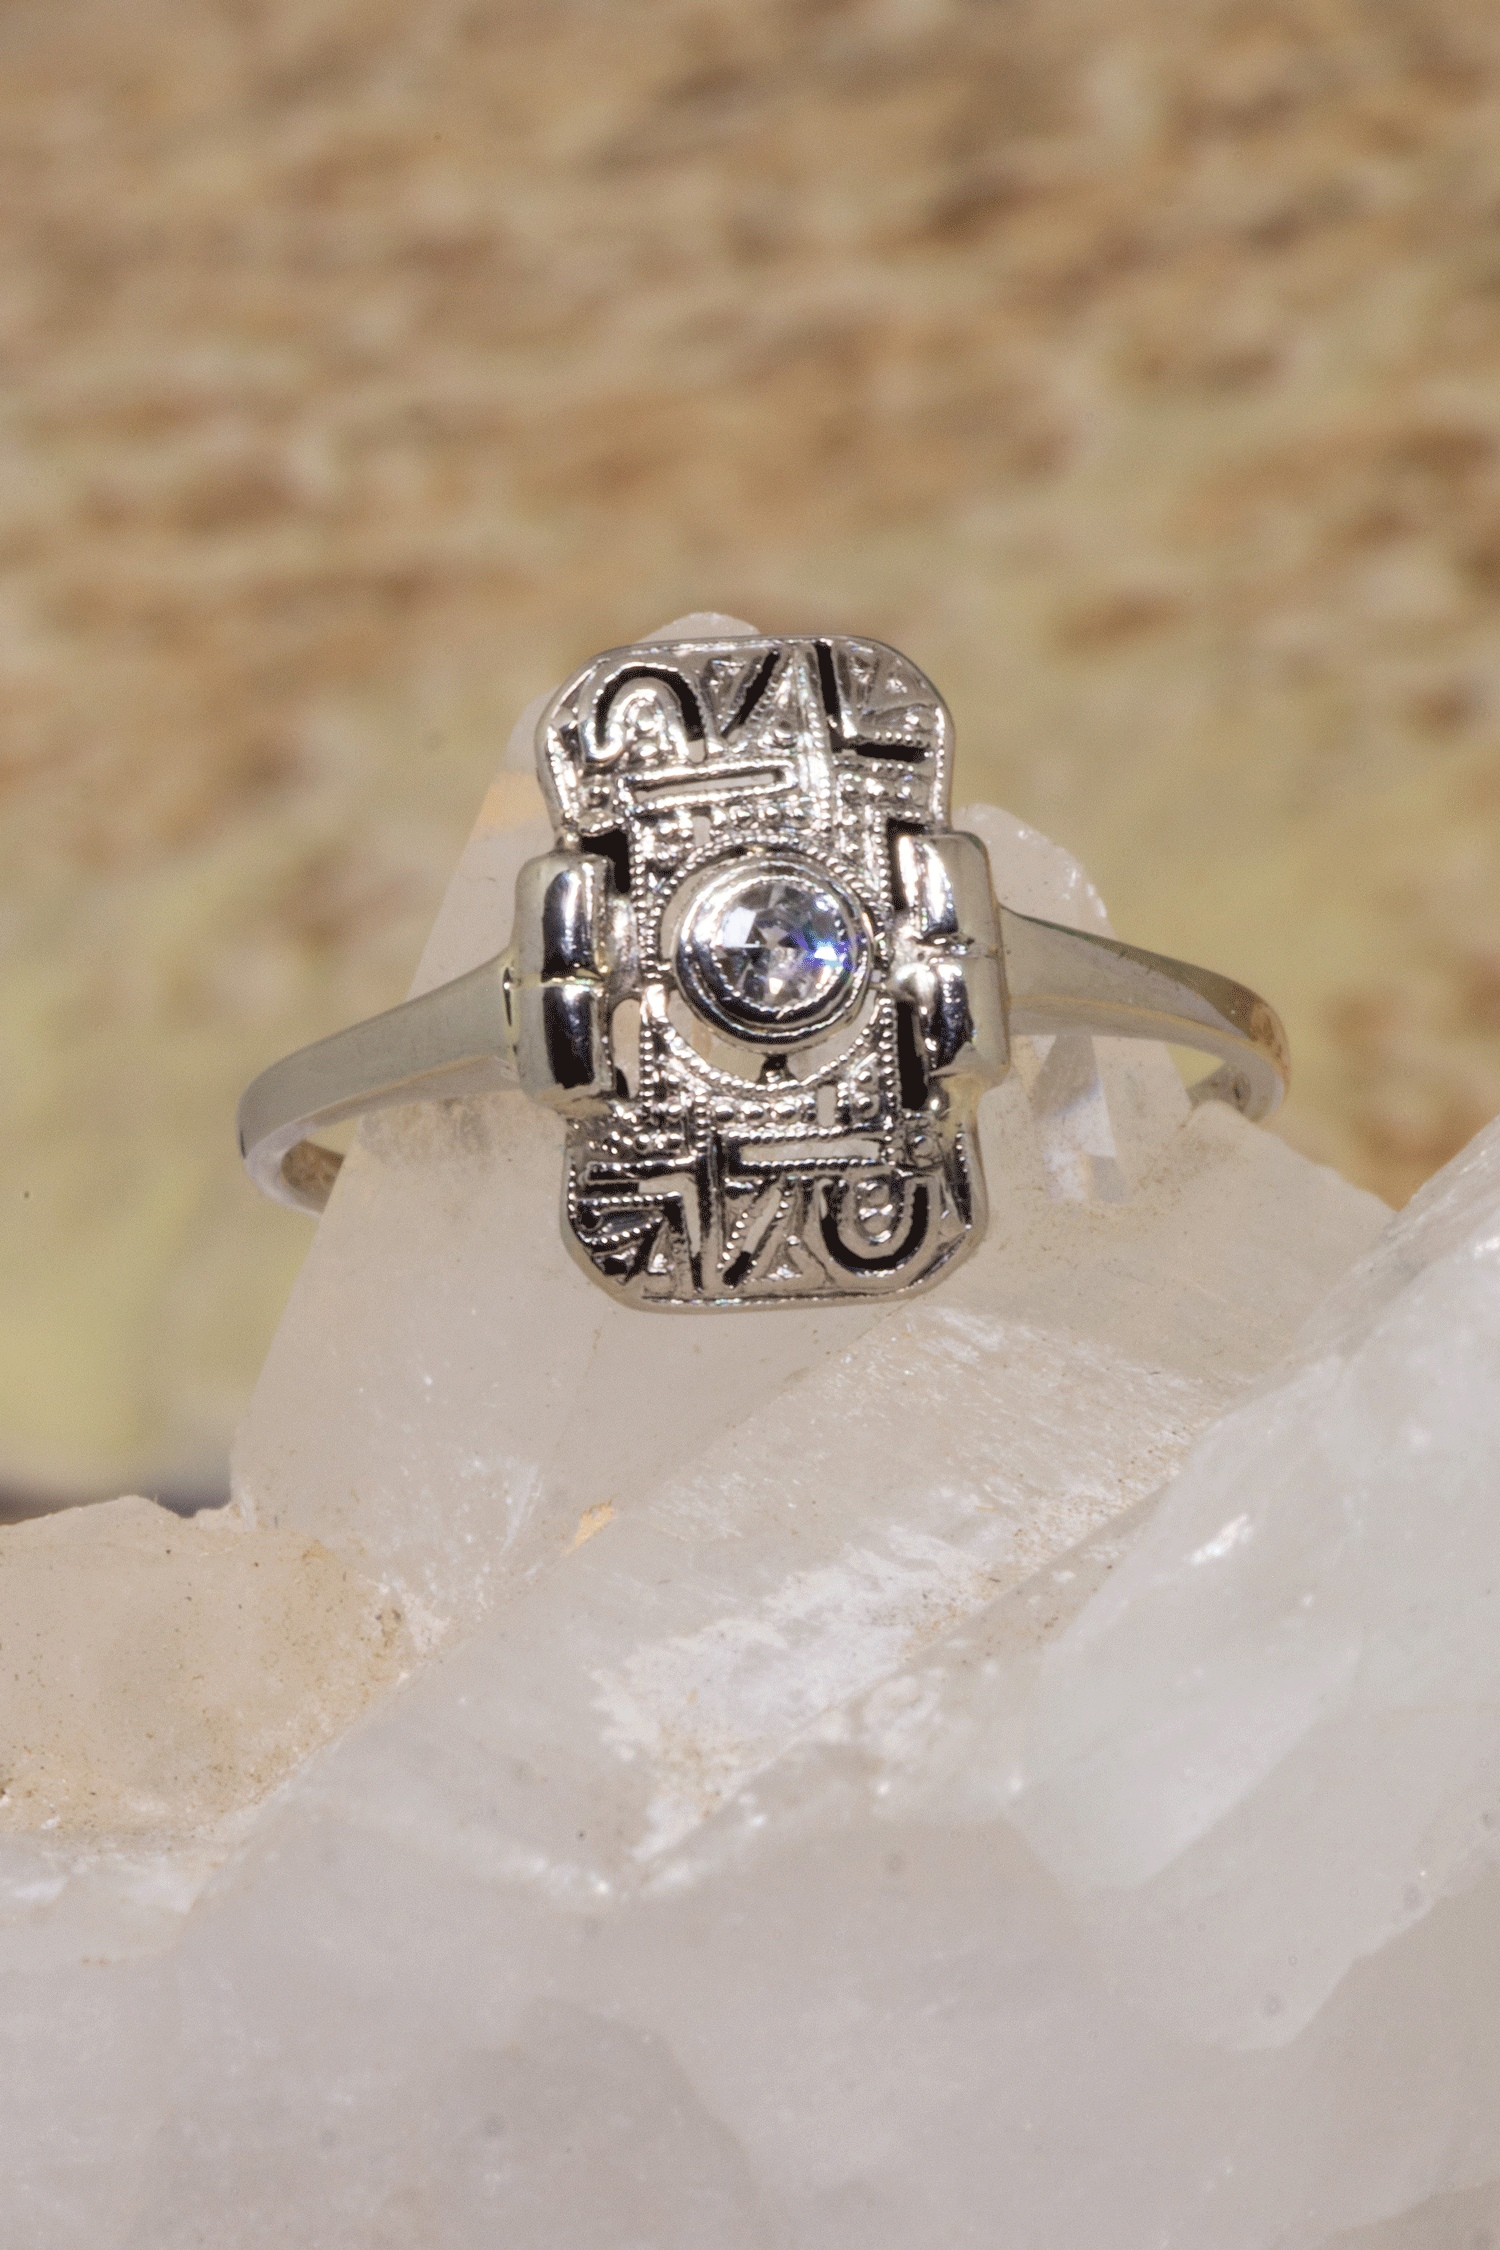 Vintage Ring Art Deco | Mombasa Rose Boutique | Retro Style Ring